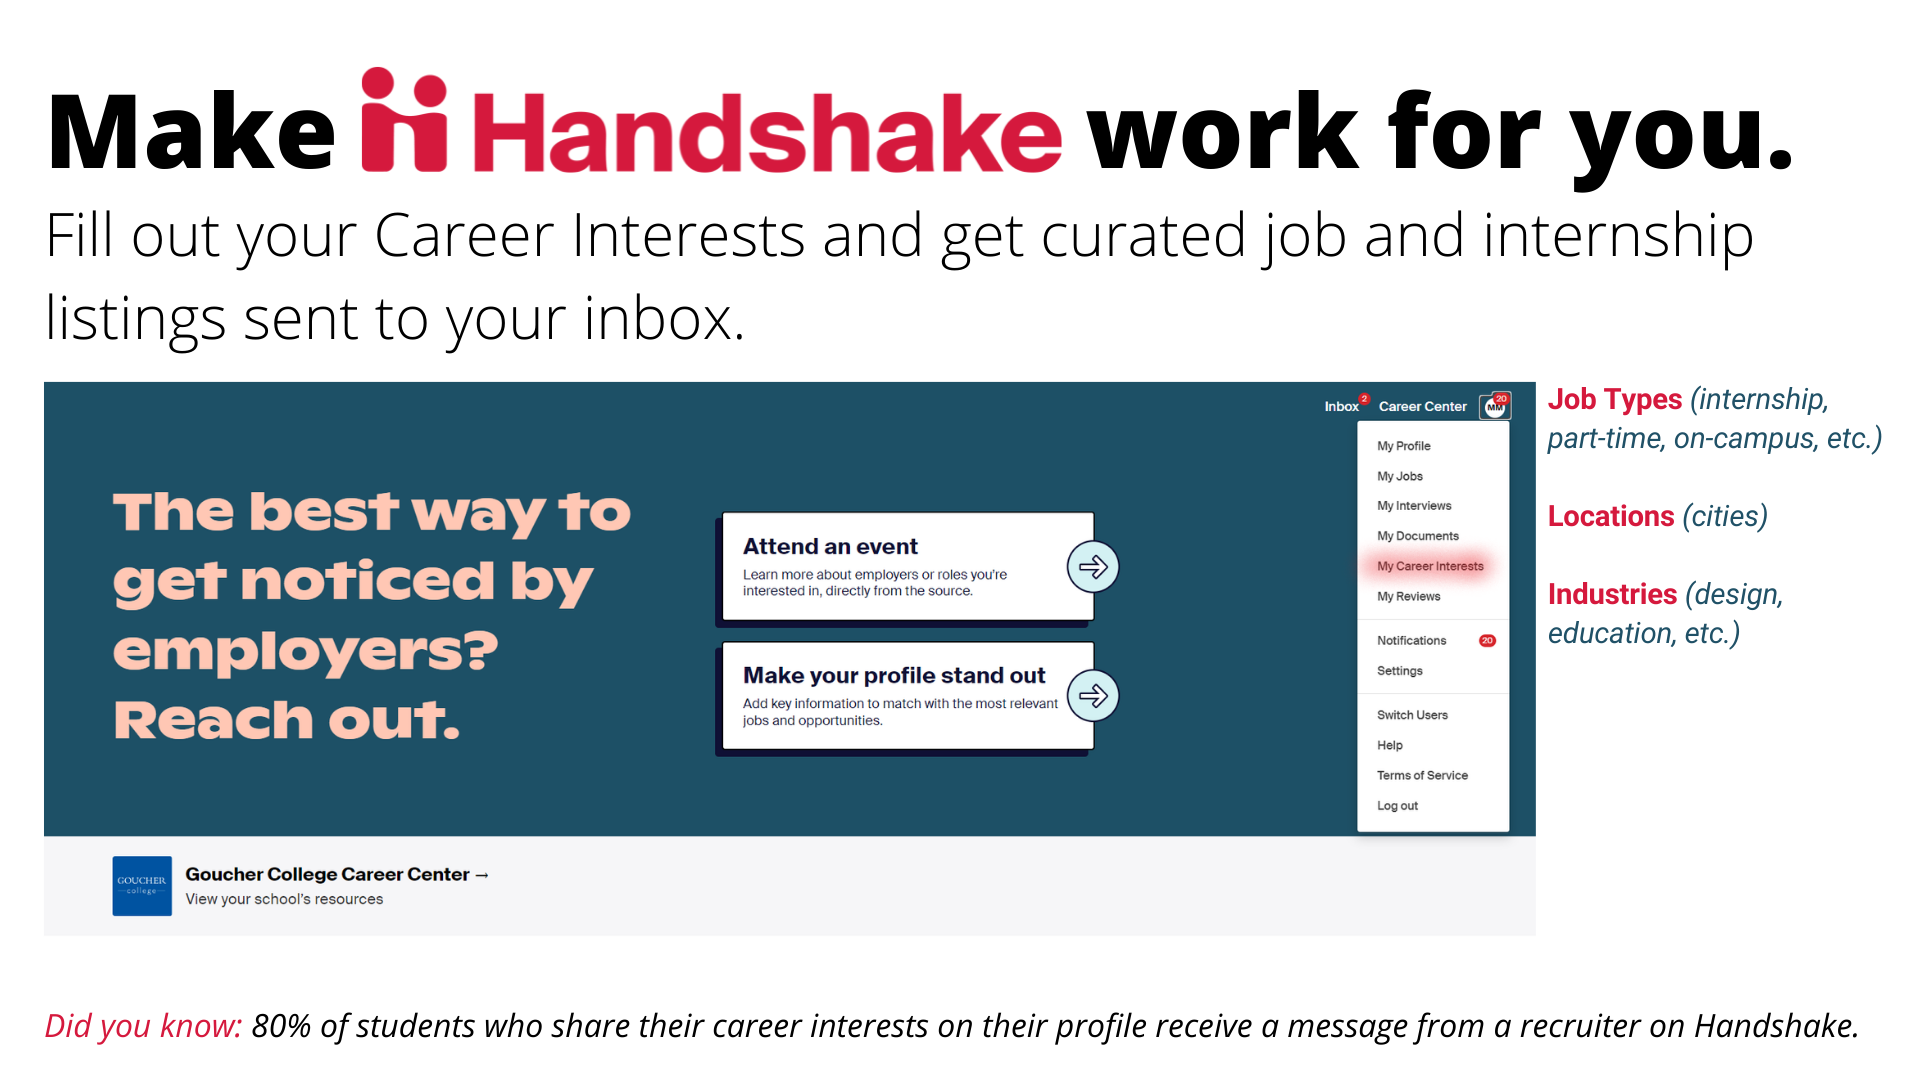 Make Handshake Work For You: Fill out your Career Interests and get curated job and internship listings sent to your inbox. Job Types (internship,  part-time, on-campus, etc.)  Locations (cities)   Industries (design, education, etc.)